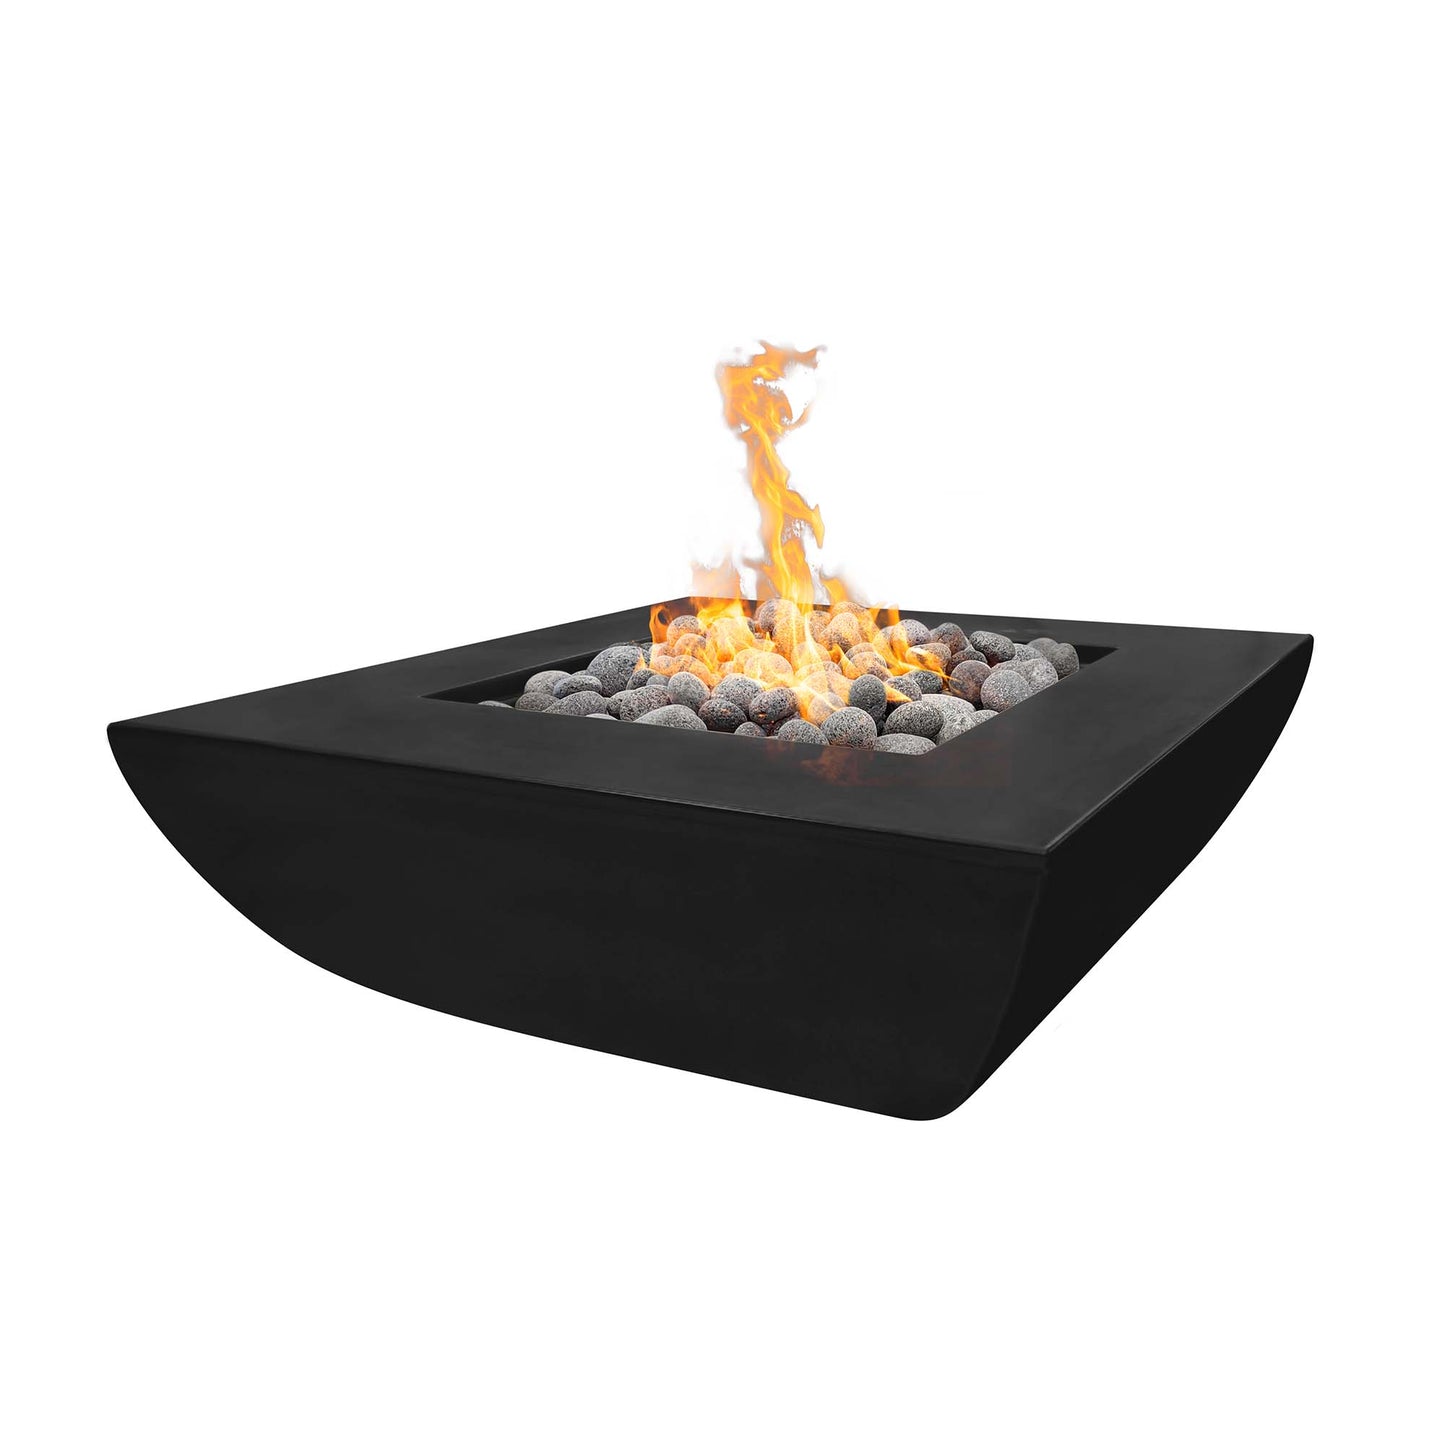 The Outdoor Plus Square Avalon 42" Metallic Silver GFRC Concrete Liquid Propane Fire Pit with Match Lit with Flame Sense Ignition